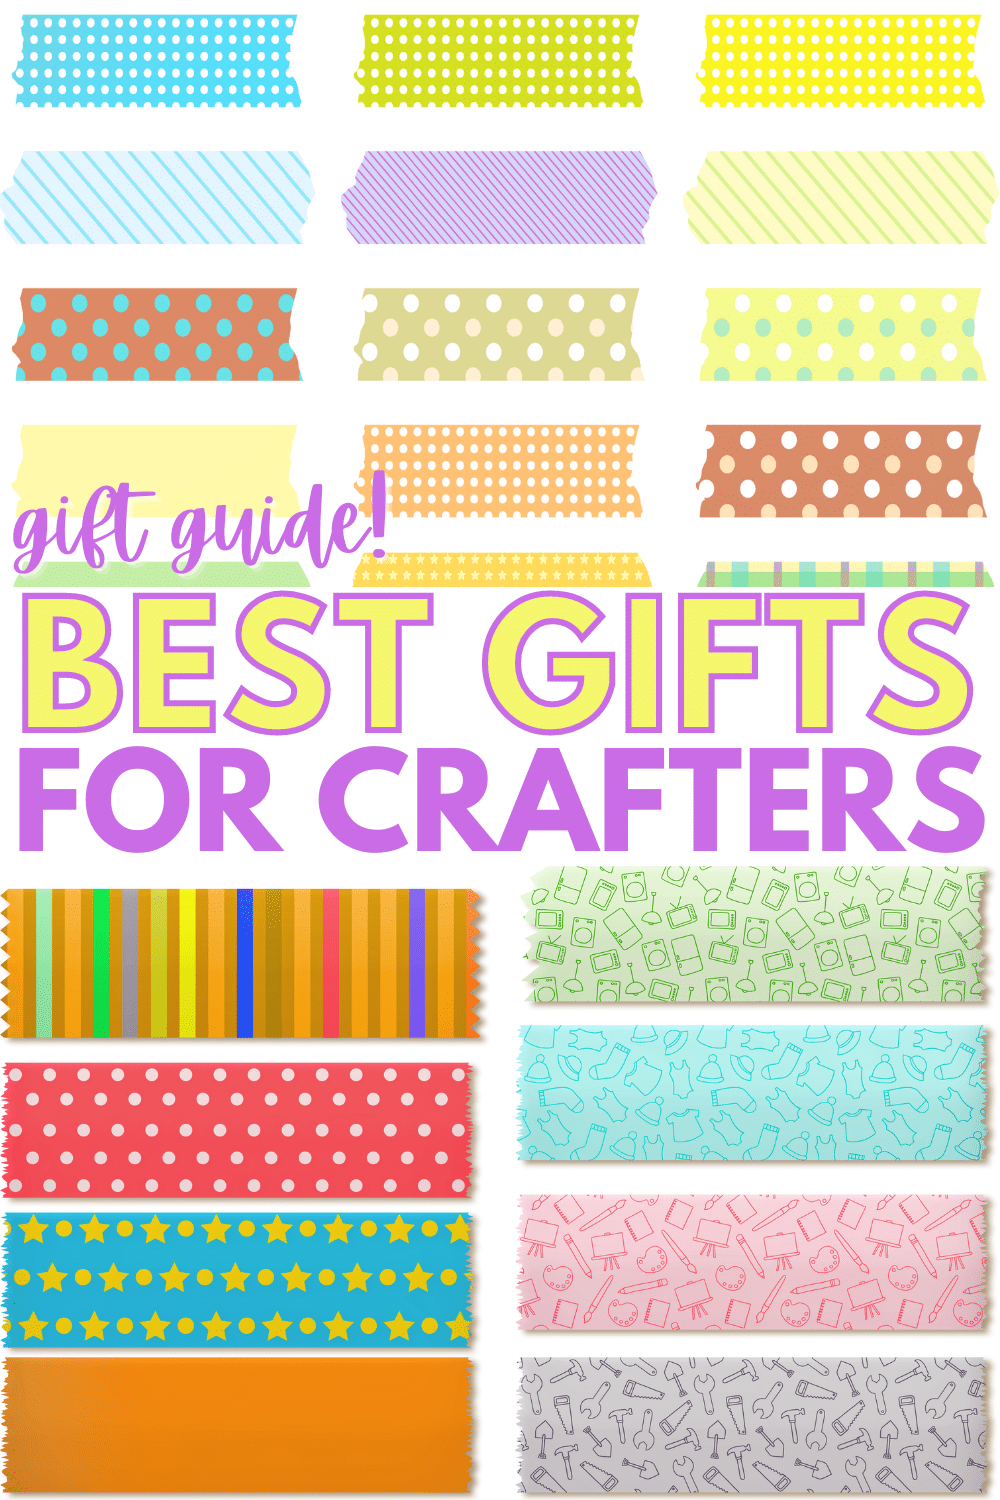 Best Gifts for Crafters with a title text reading Gift Guide! Best Gifts for Crafters